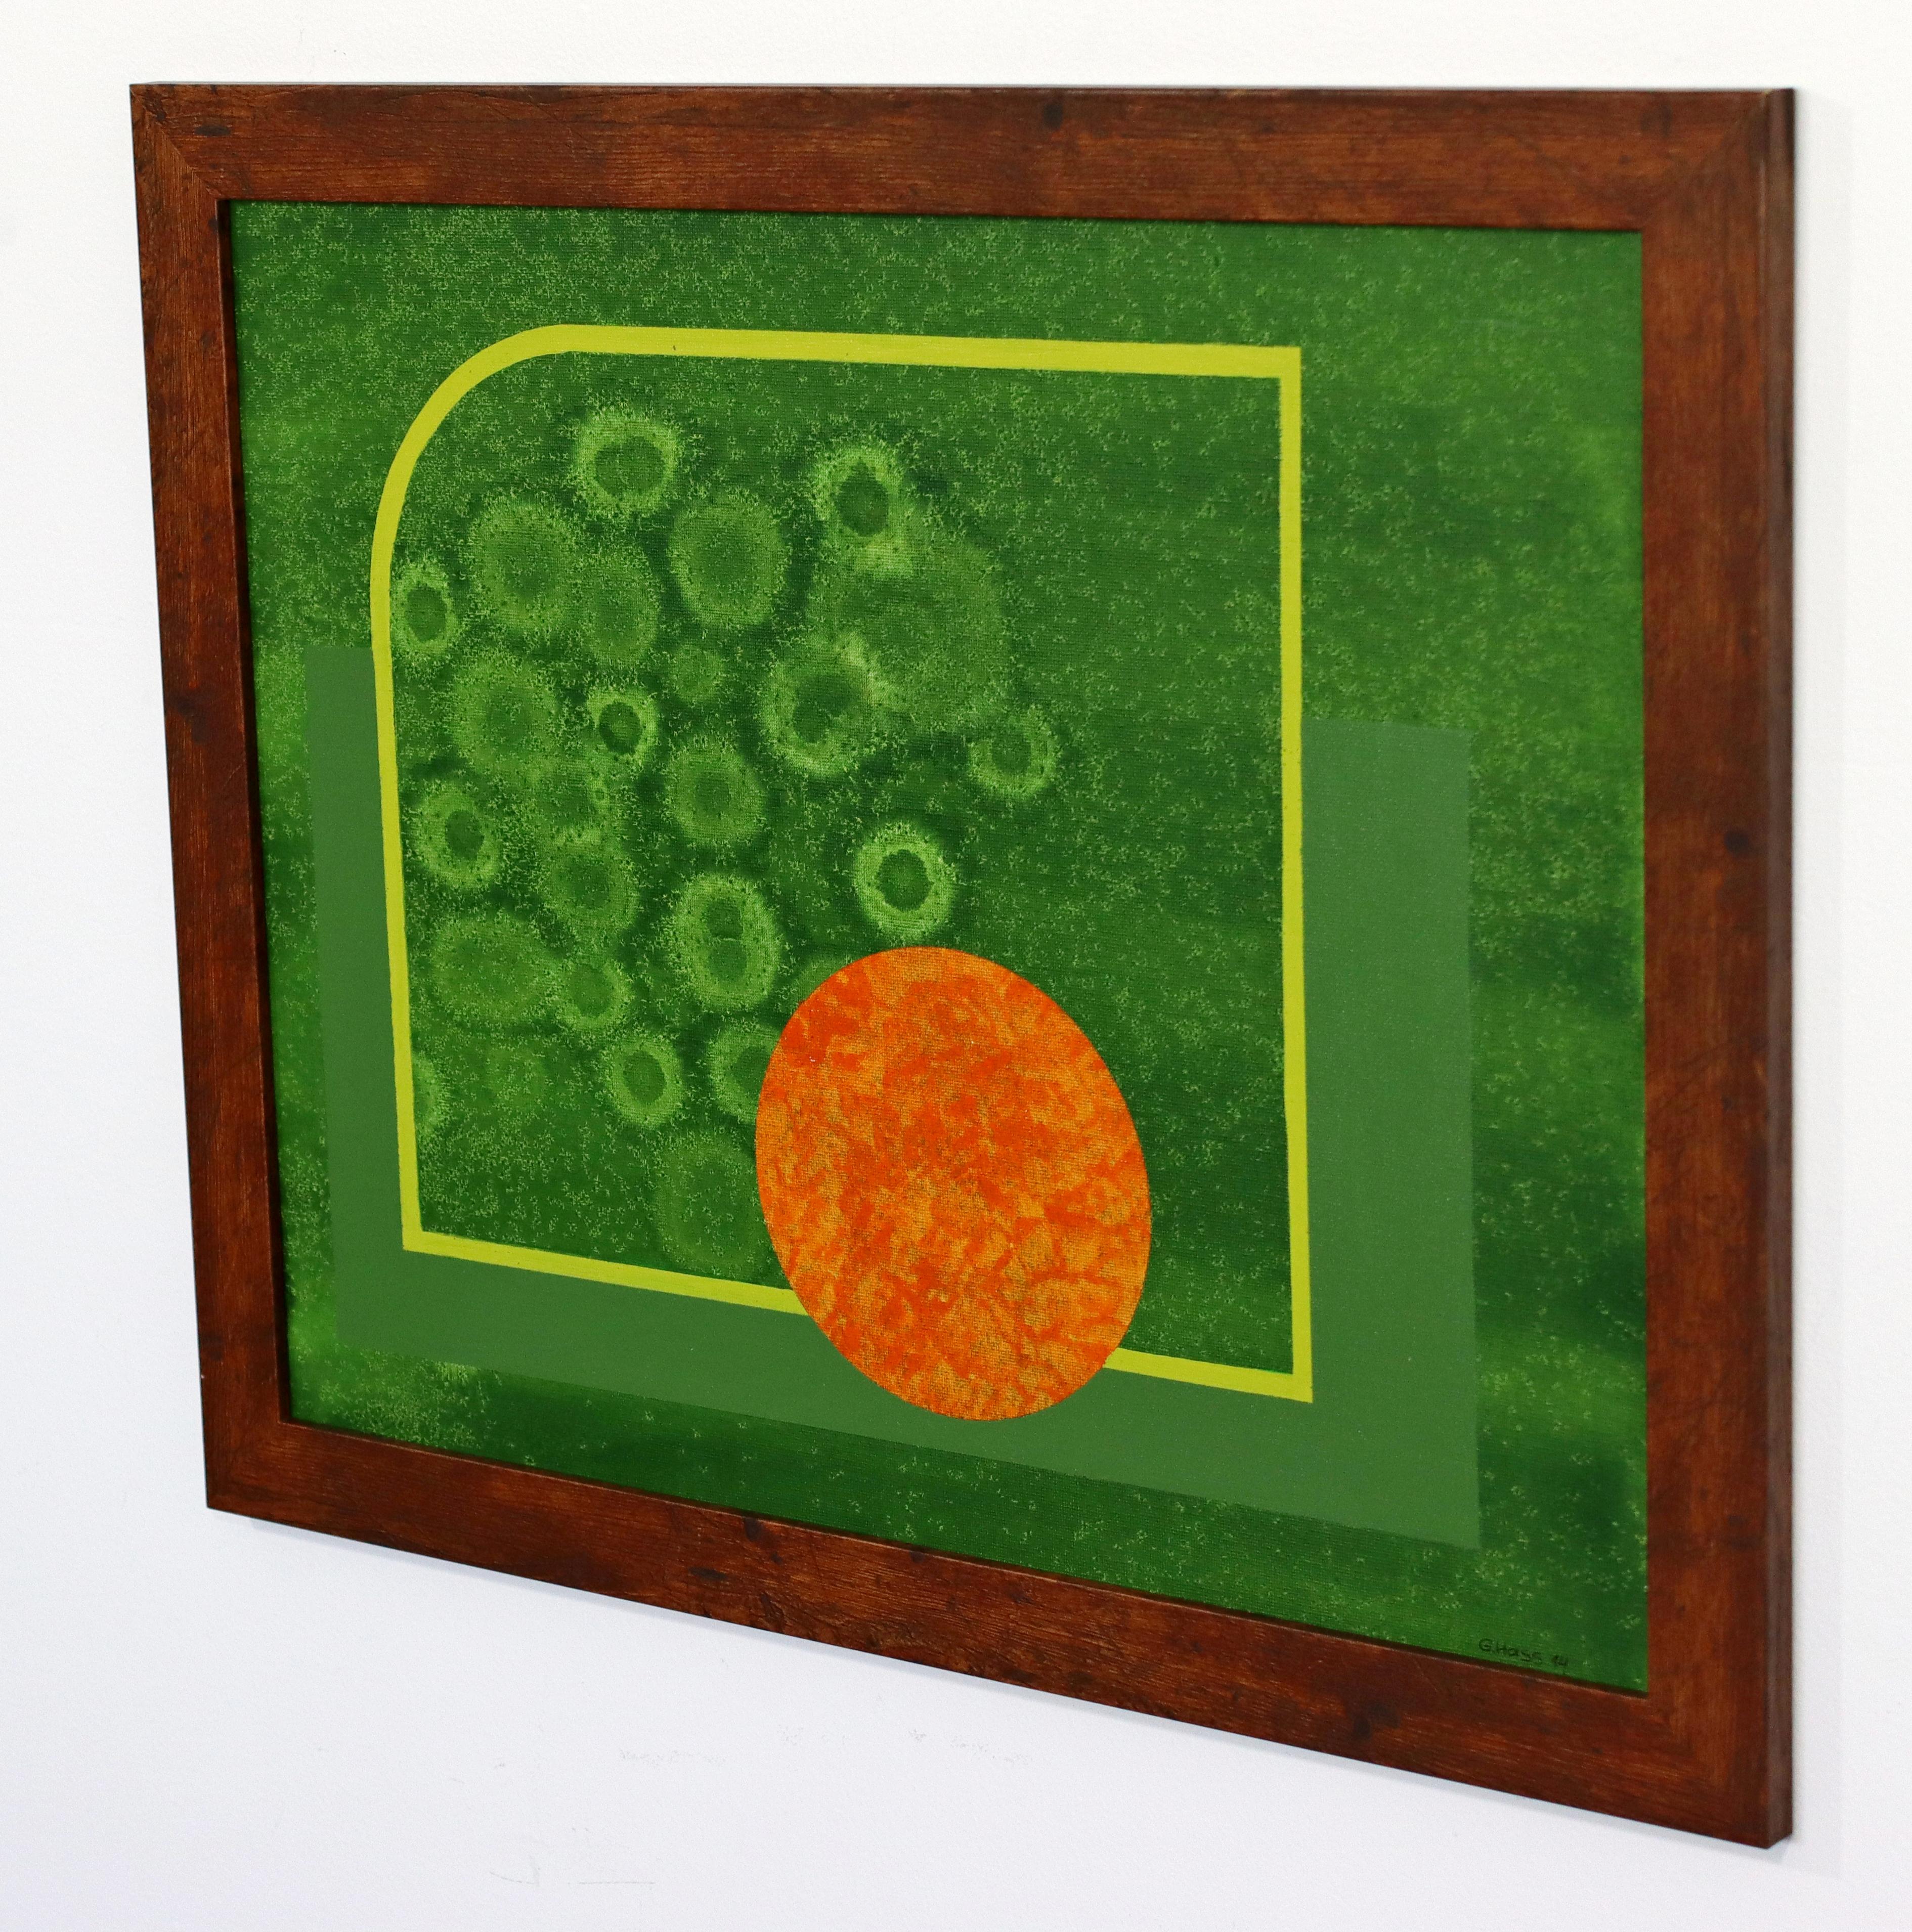 Contemporary Modernist Framed Gunda Hass Signed Acrylic Painting Green Orange In Good Condition For Sale In Keego Harbor, MI